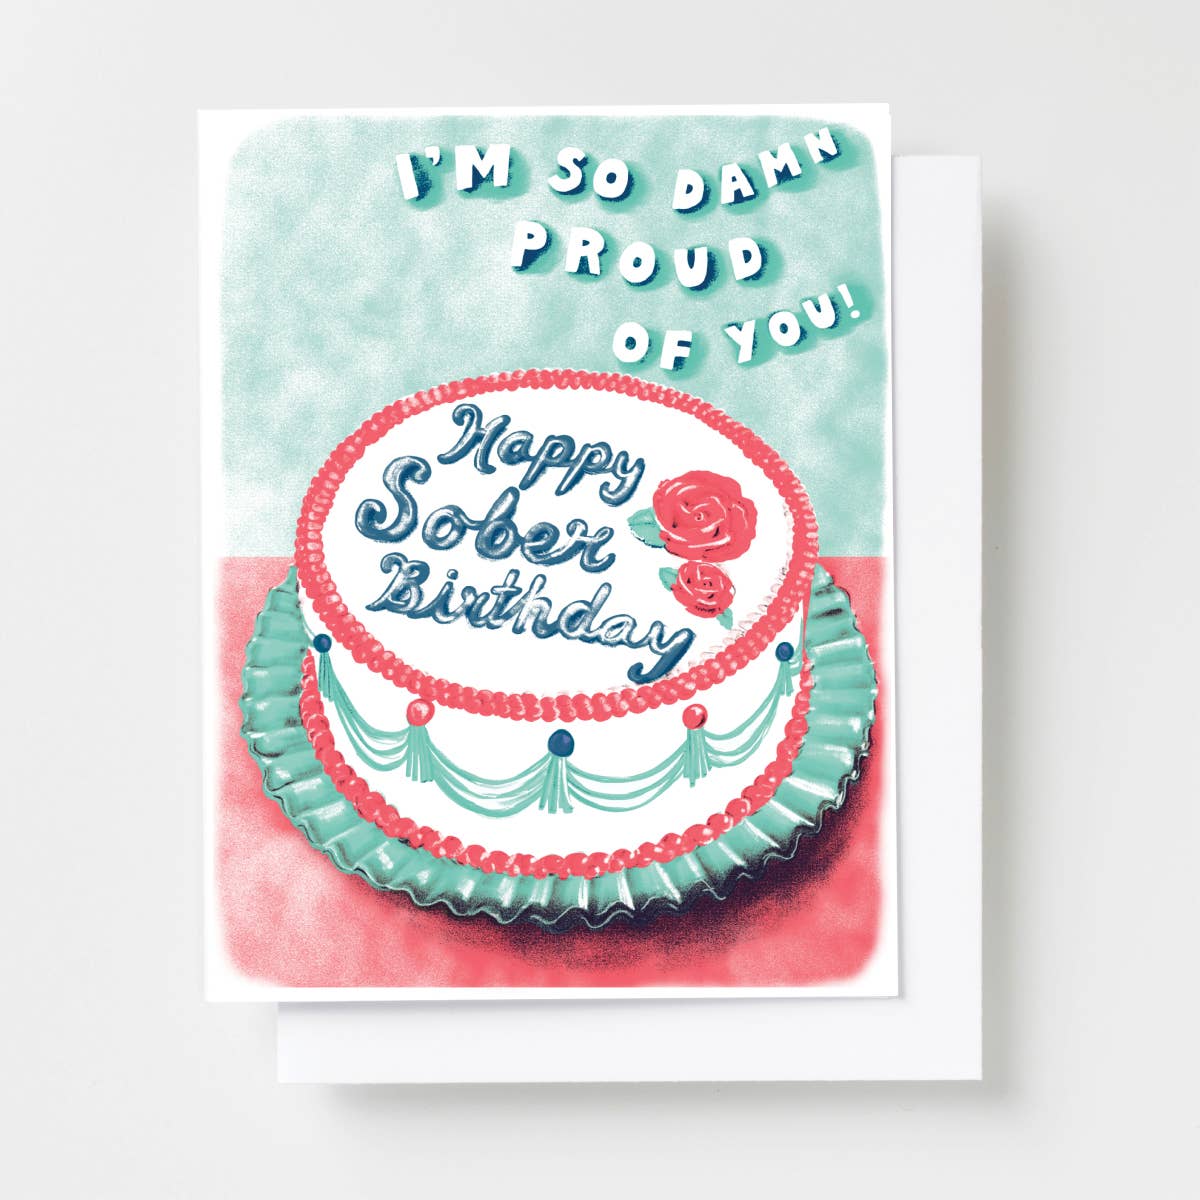 "Happy Sober Birthday (So Damn Proud of You)" Risograph Card